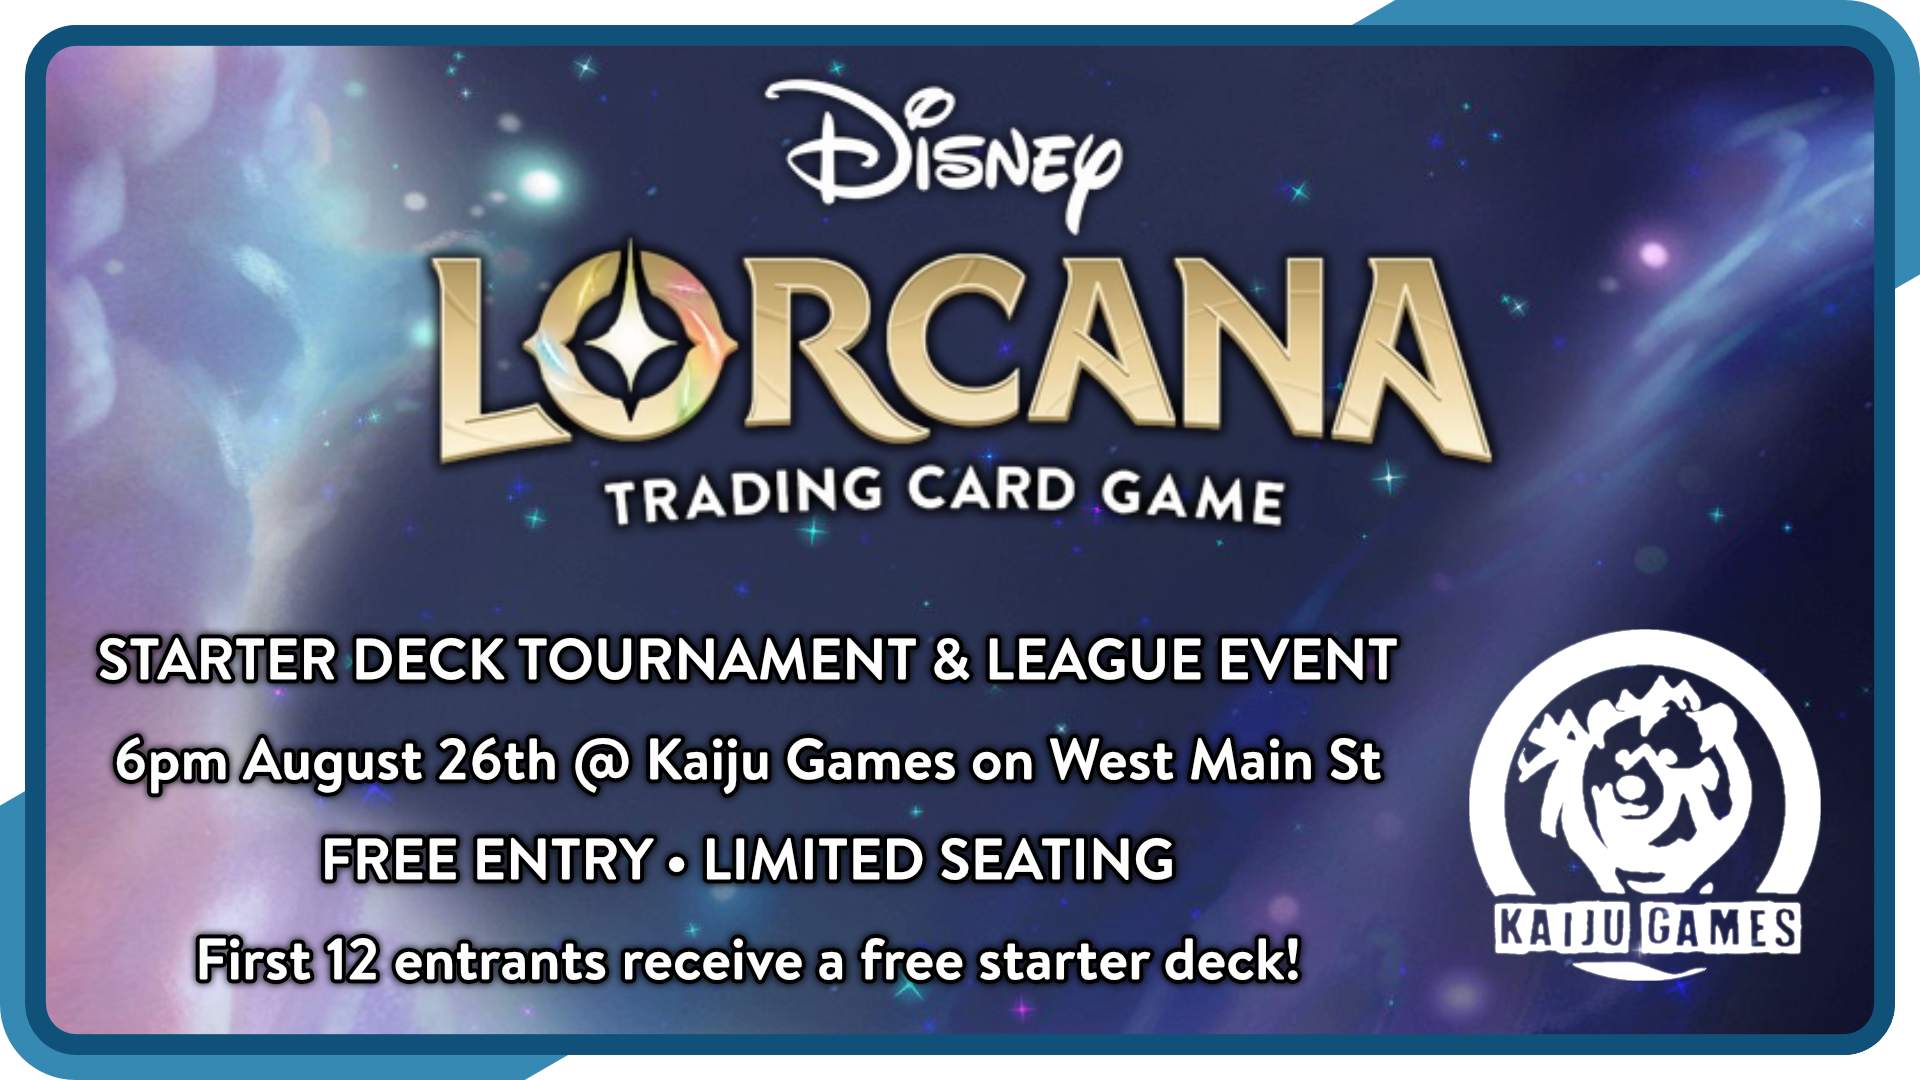 Disney Lorcana tournament and league event, August 26th at 6pm, at Kaiju Games on West Main Street